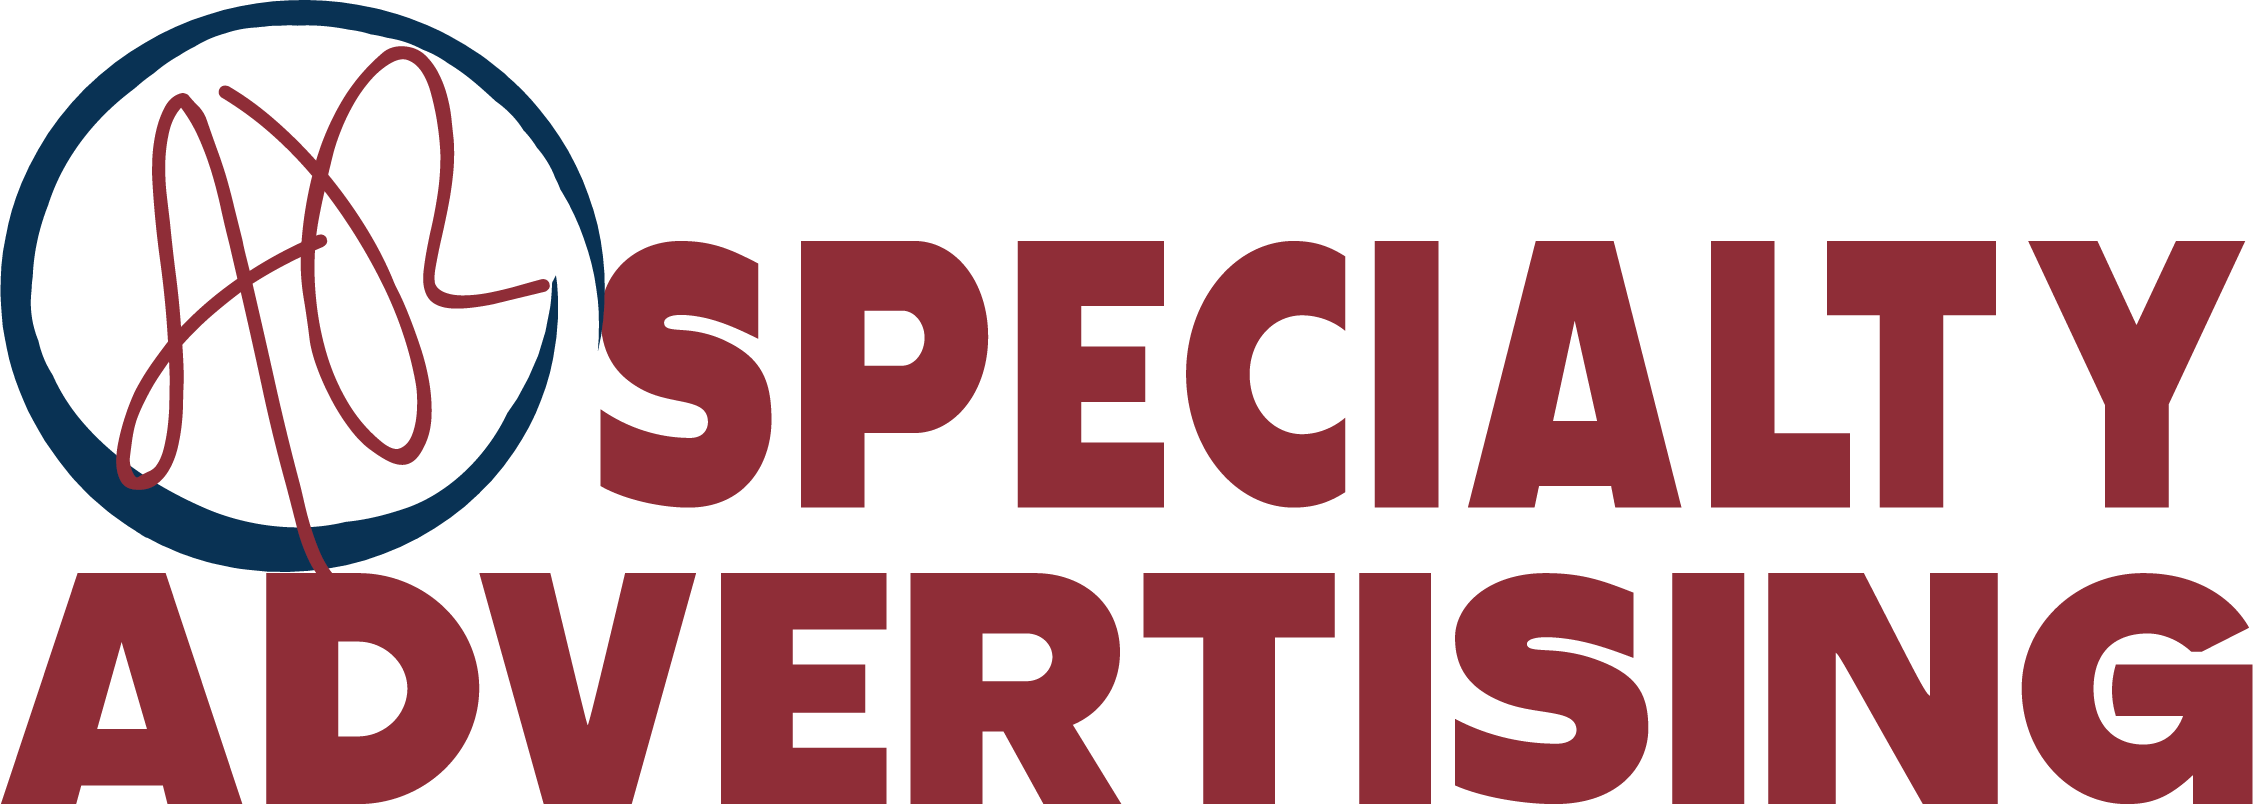 A-R Specialty Advertising's Logo